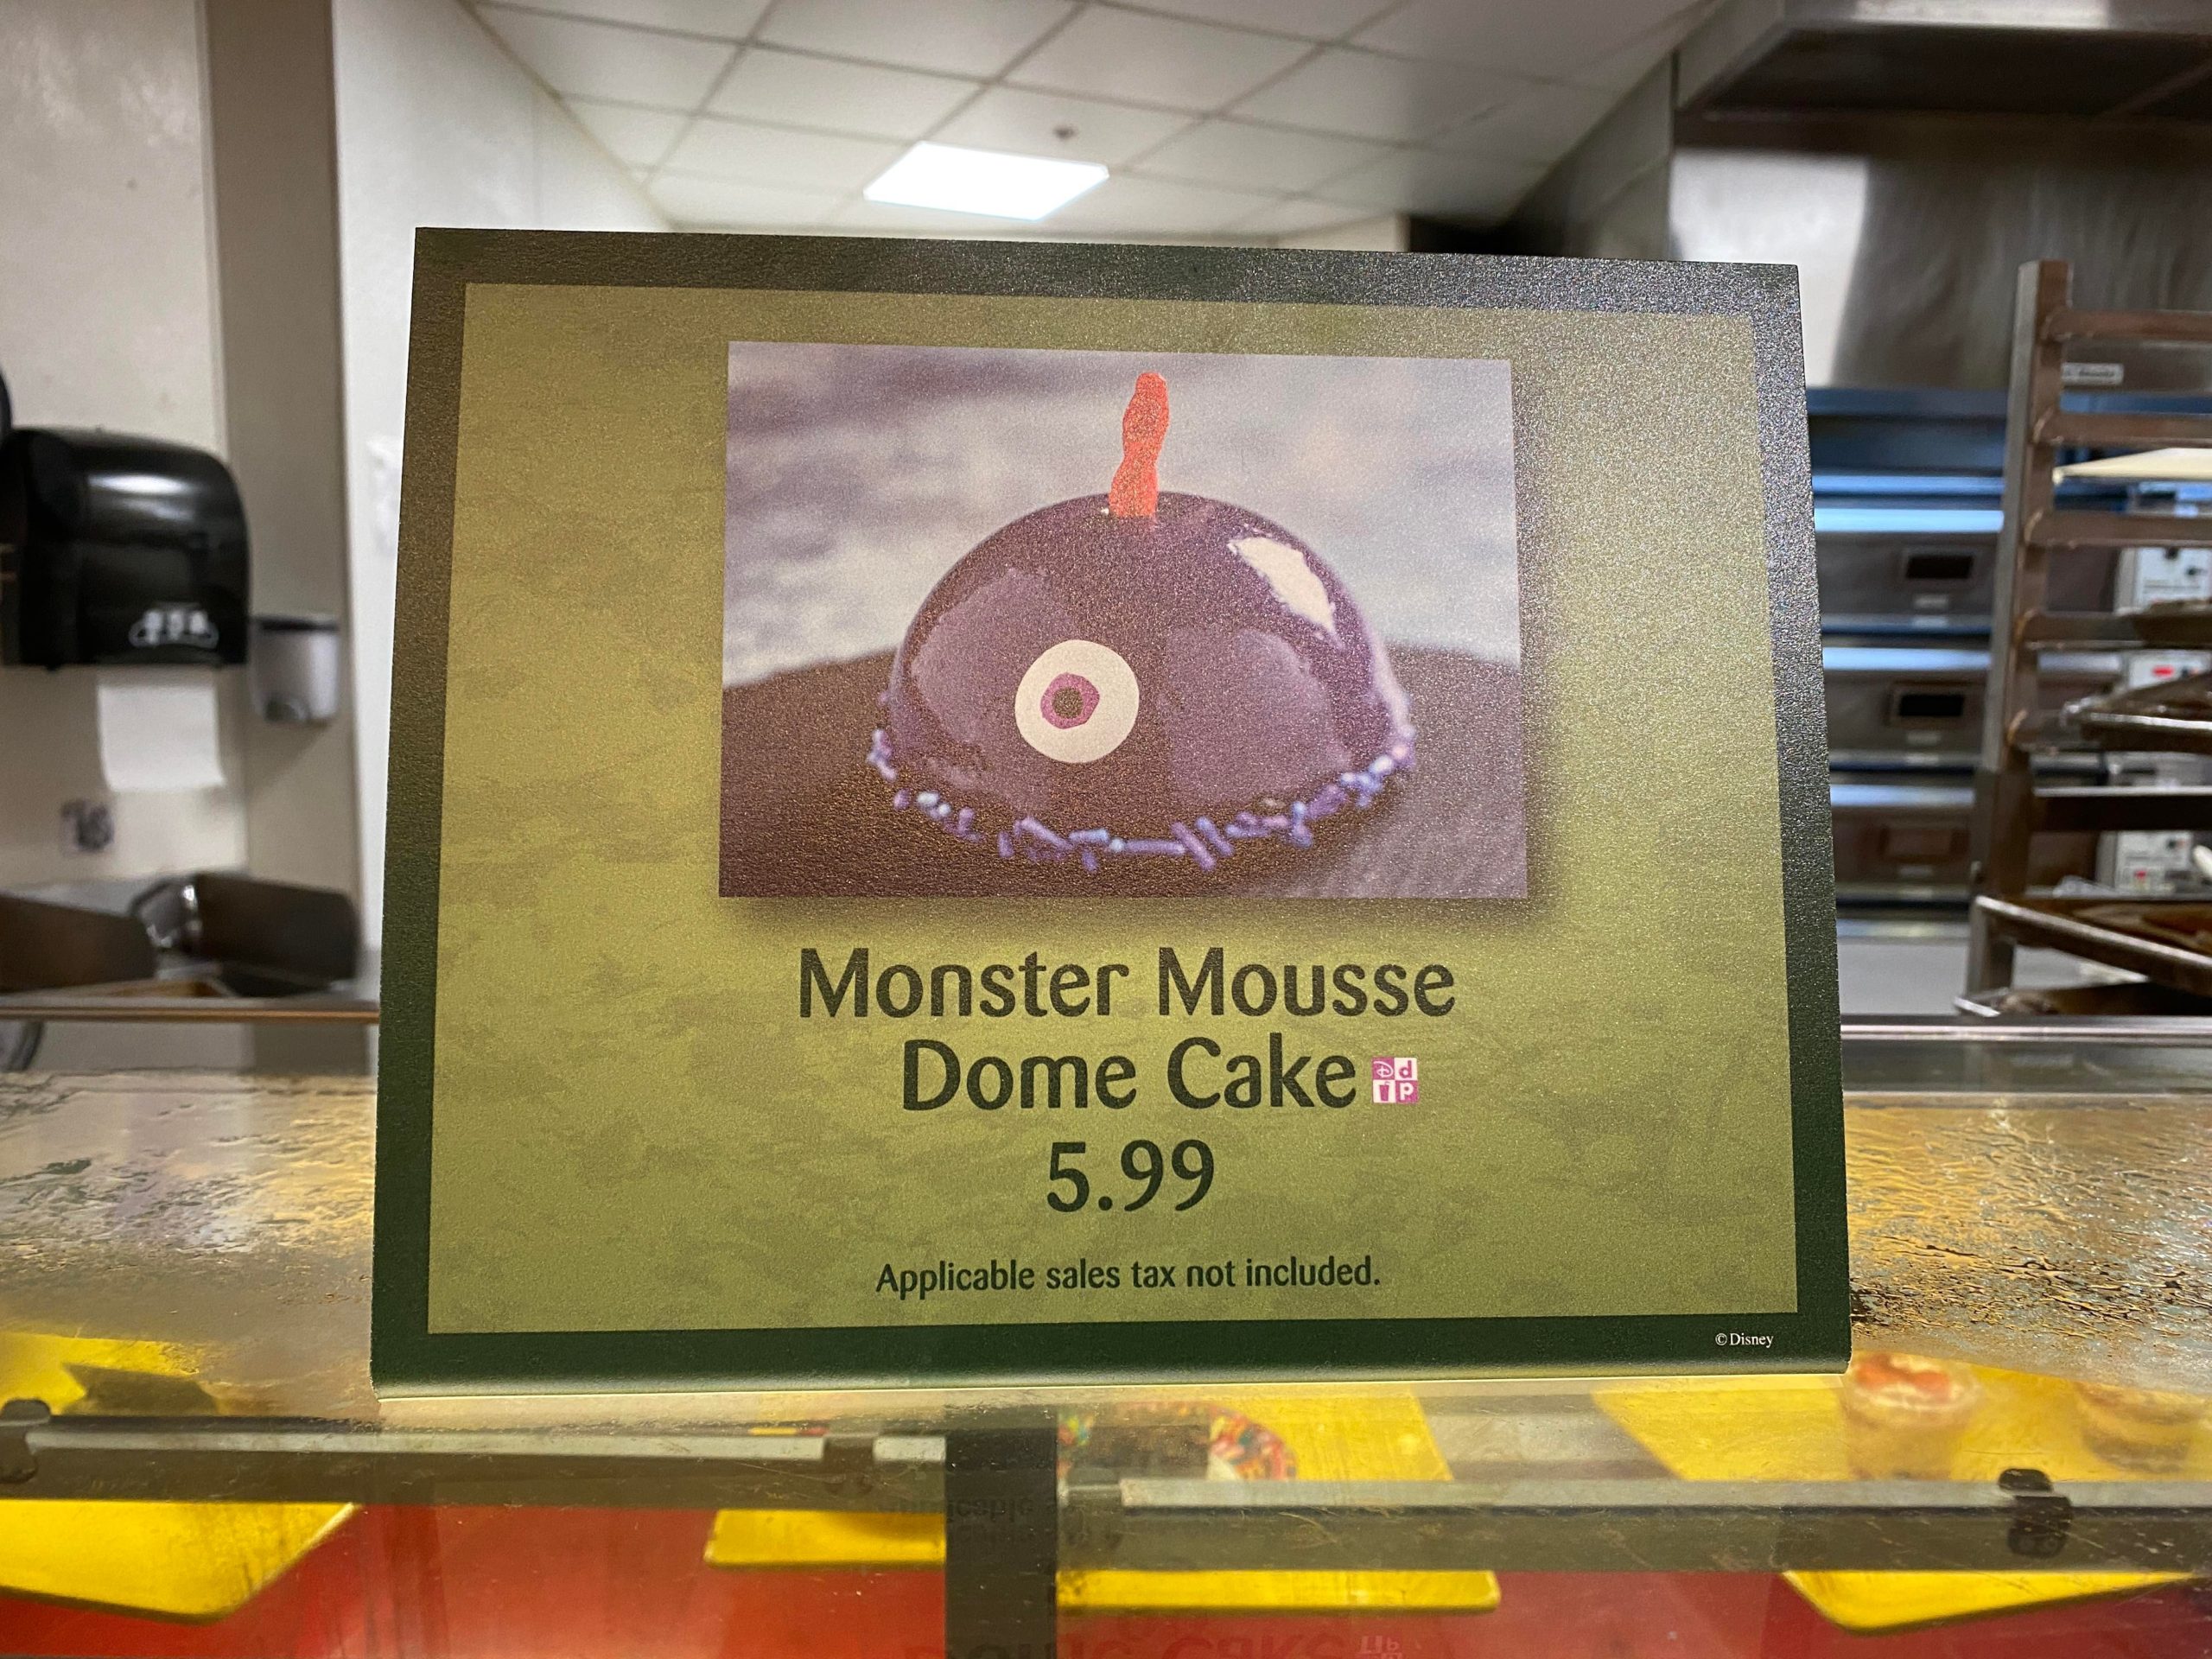 Monster Mousse